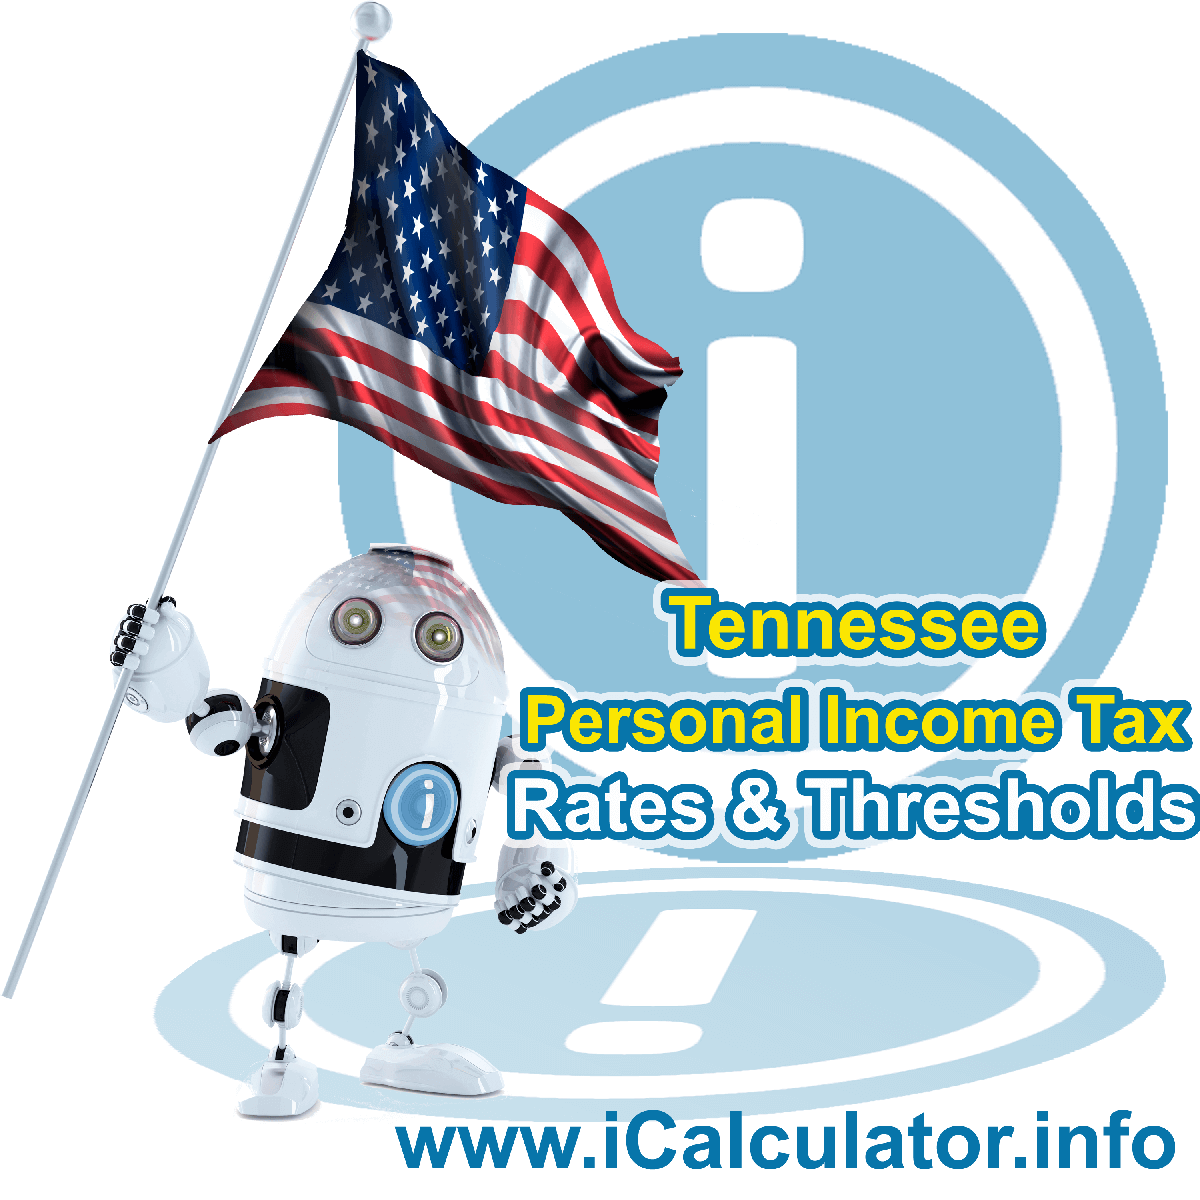 Tennessee State Tax Tables 2022. This image displays details of the Tennessee State Tax Tables for the 2022 tax return year which is provided in support of the 2022 US Tax Calculator